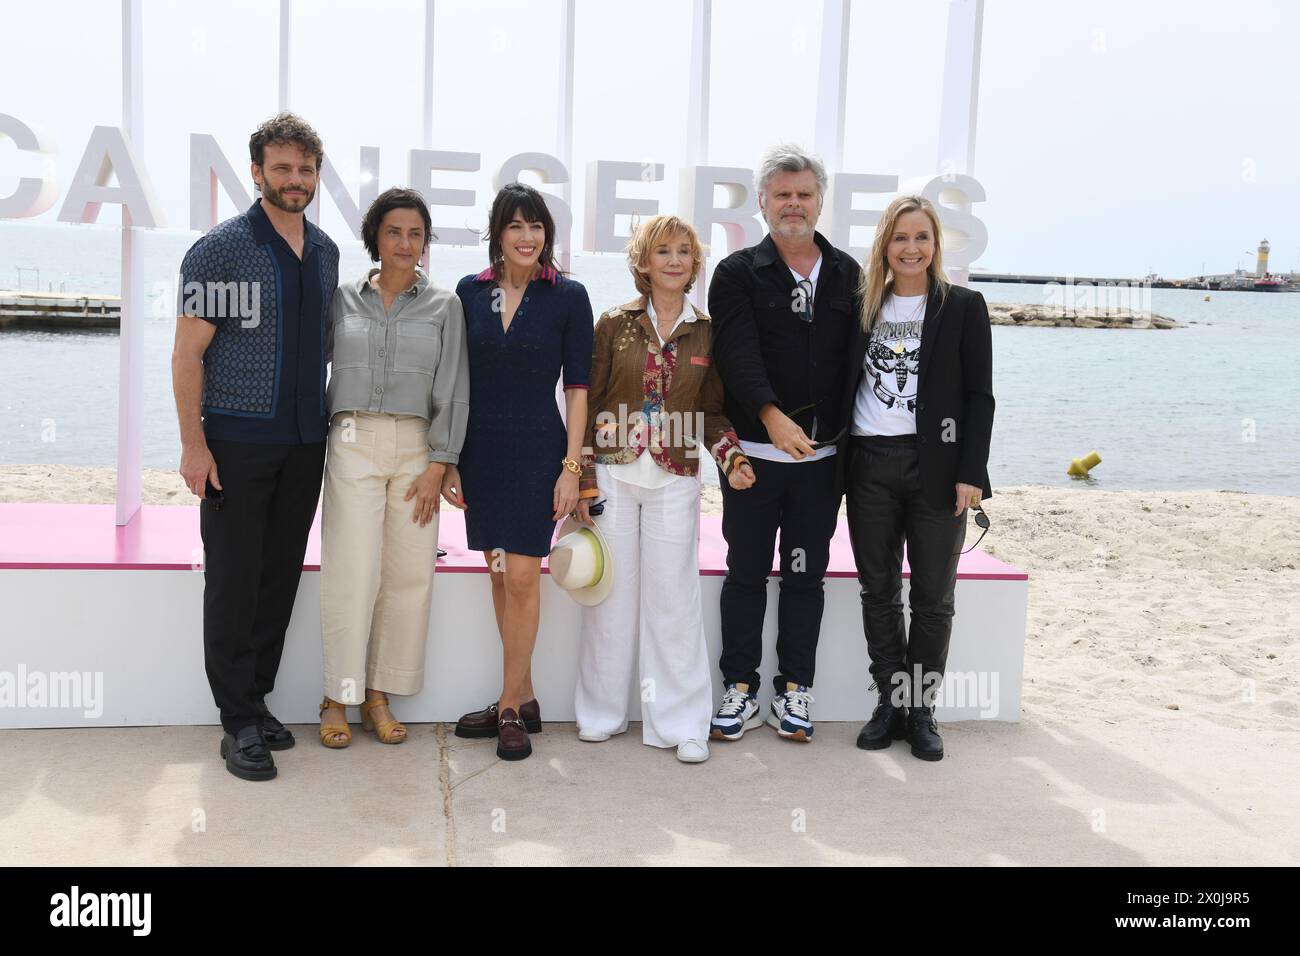 CANNES, FRANCE - APRIL 07: (L-R) Catherine Marchal, Arnaud Binard, Nolwenn Leroy and Marie-Anne Chazel attends the 'Brocéliande' Photocall during the Stock Photo